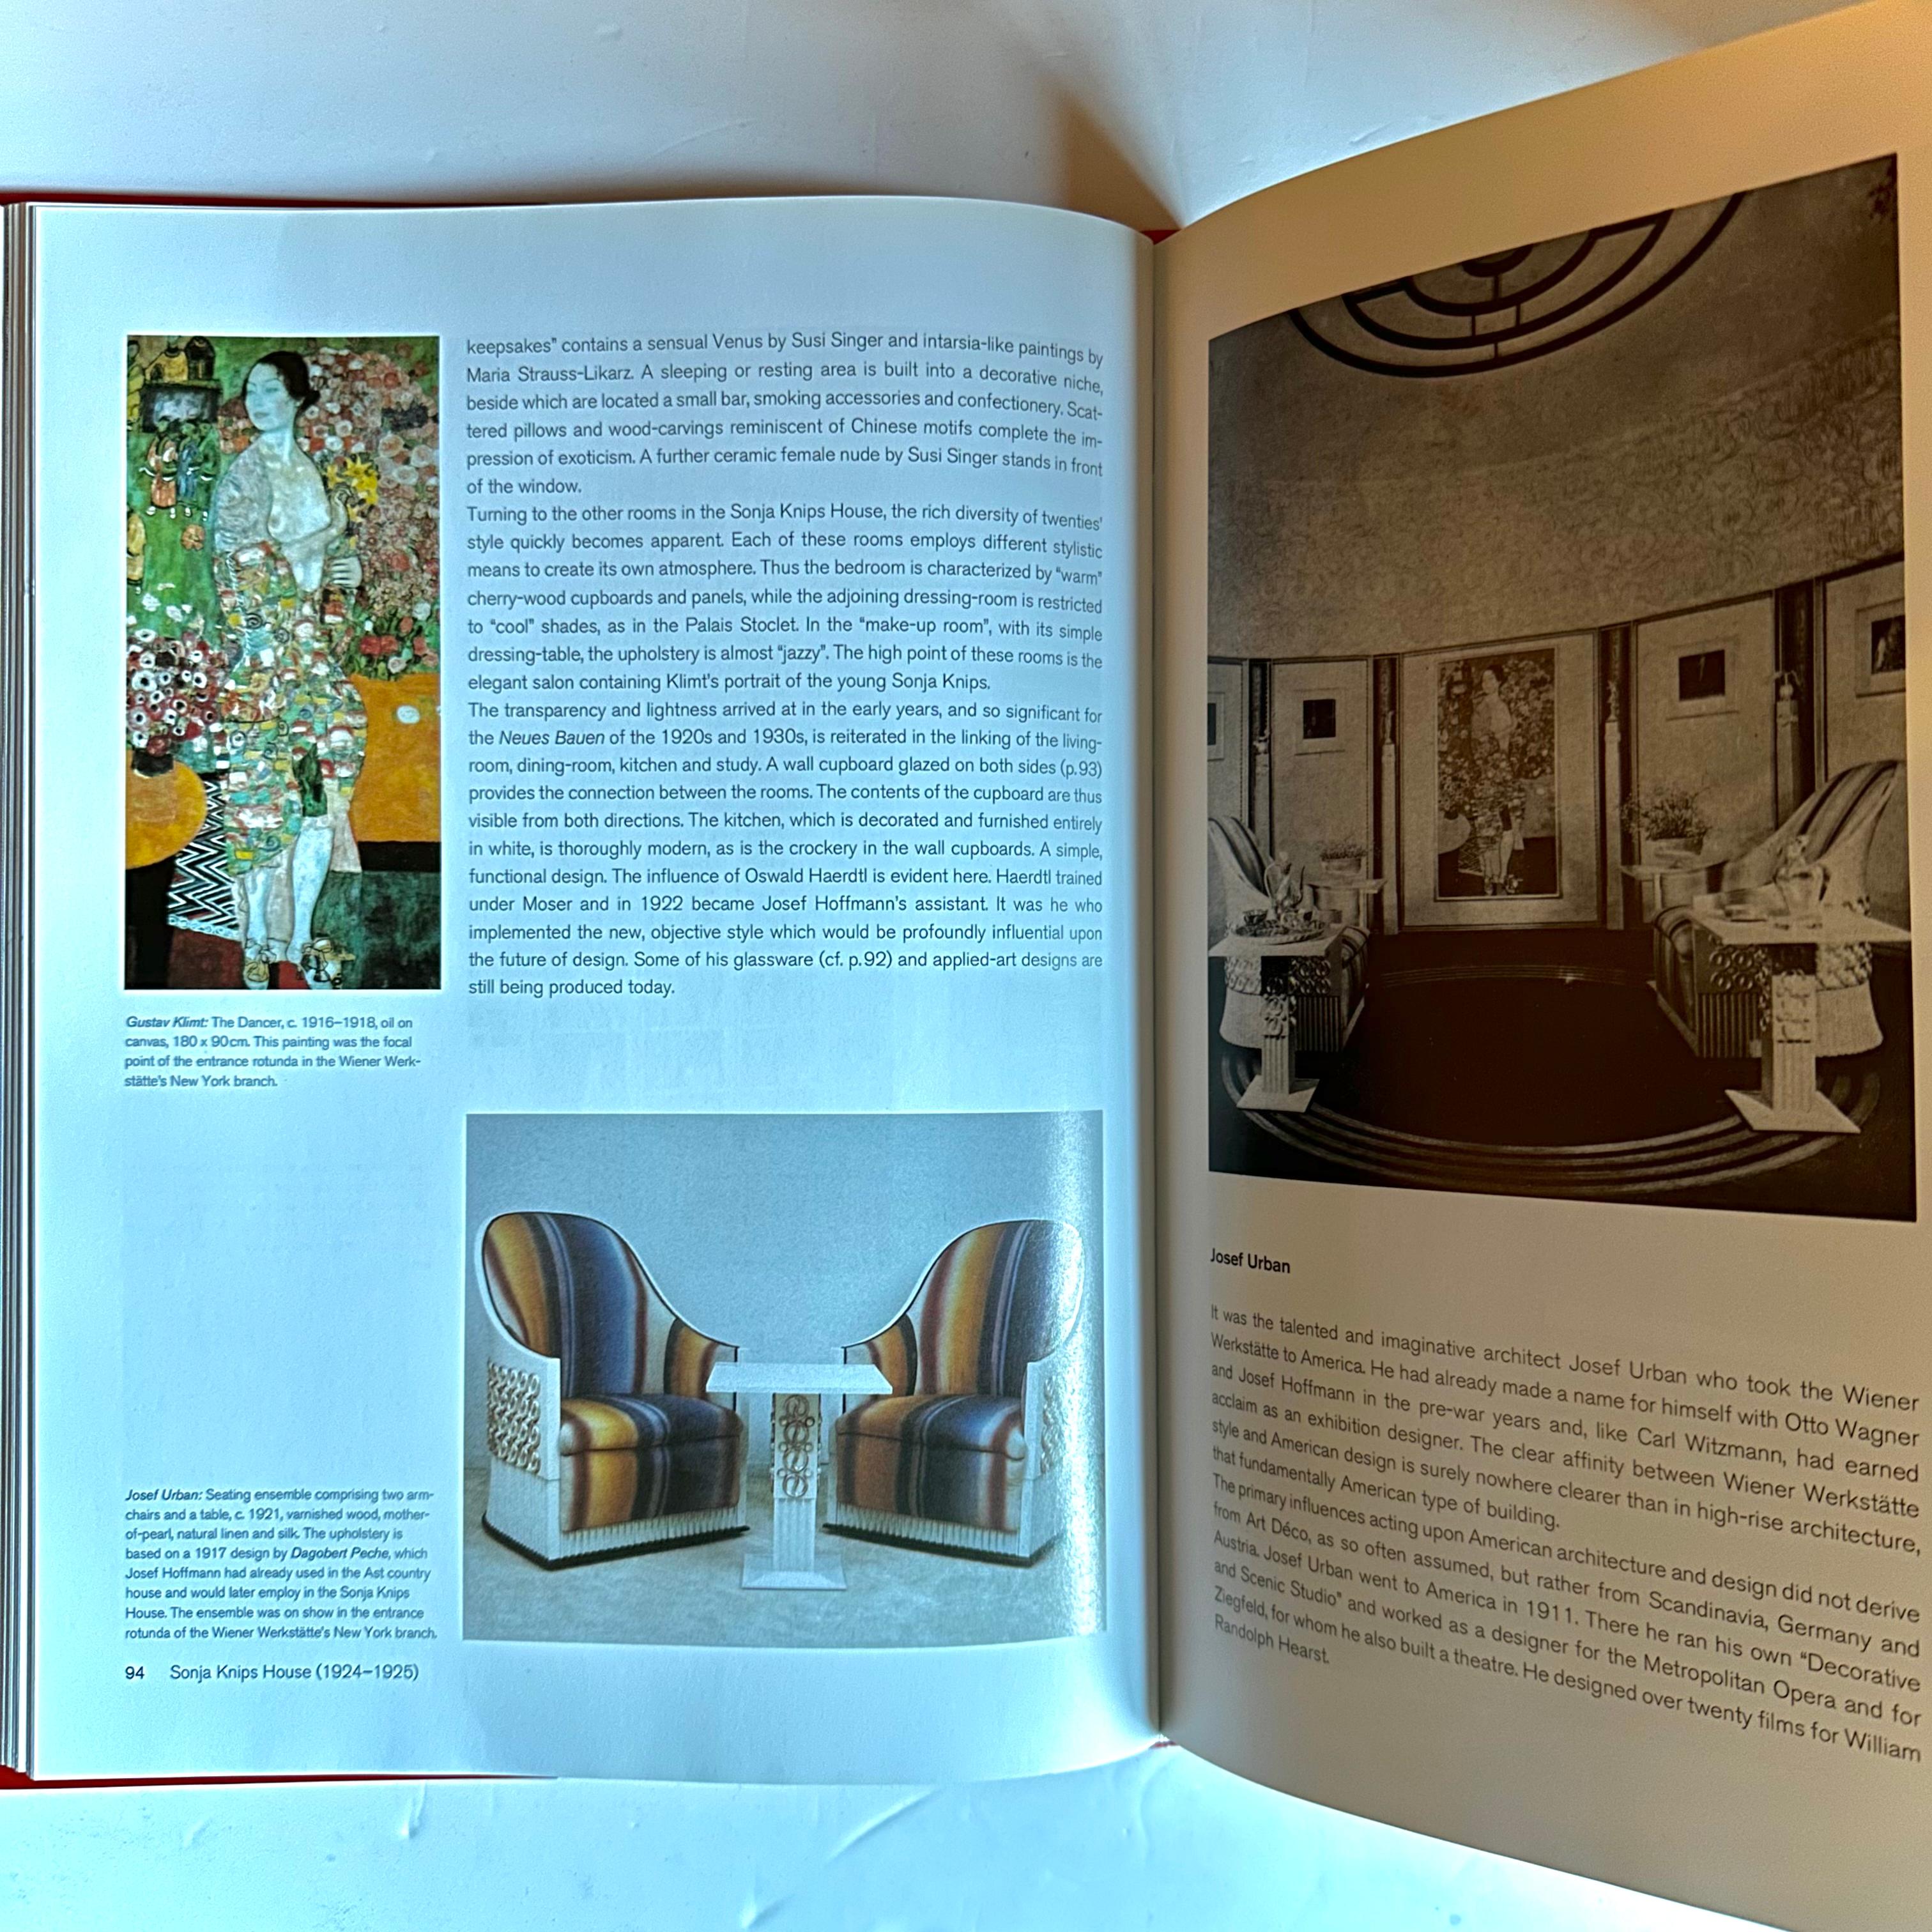 Published by Taschen, Köln, 2008. Hardback with English text. 

This exceptional volume celebrates the artistic ingenuity of the Vienna Workshop, which was closely associated with the secessionist movement, aiming to break away from historicism and